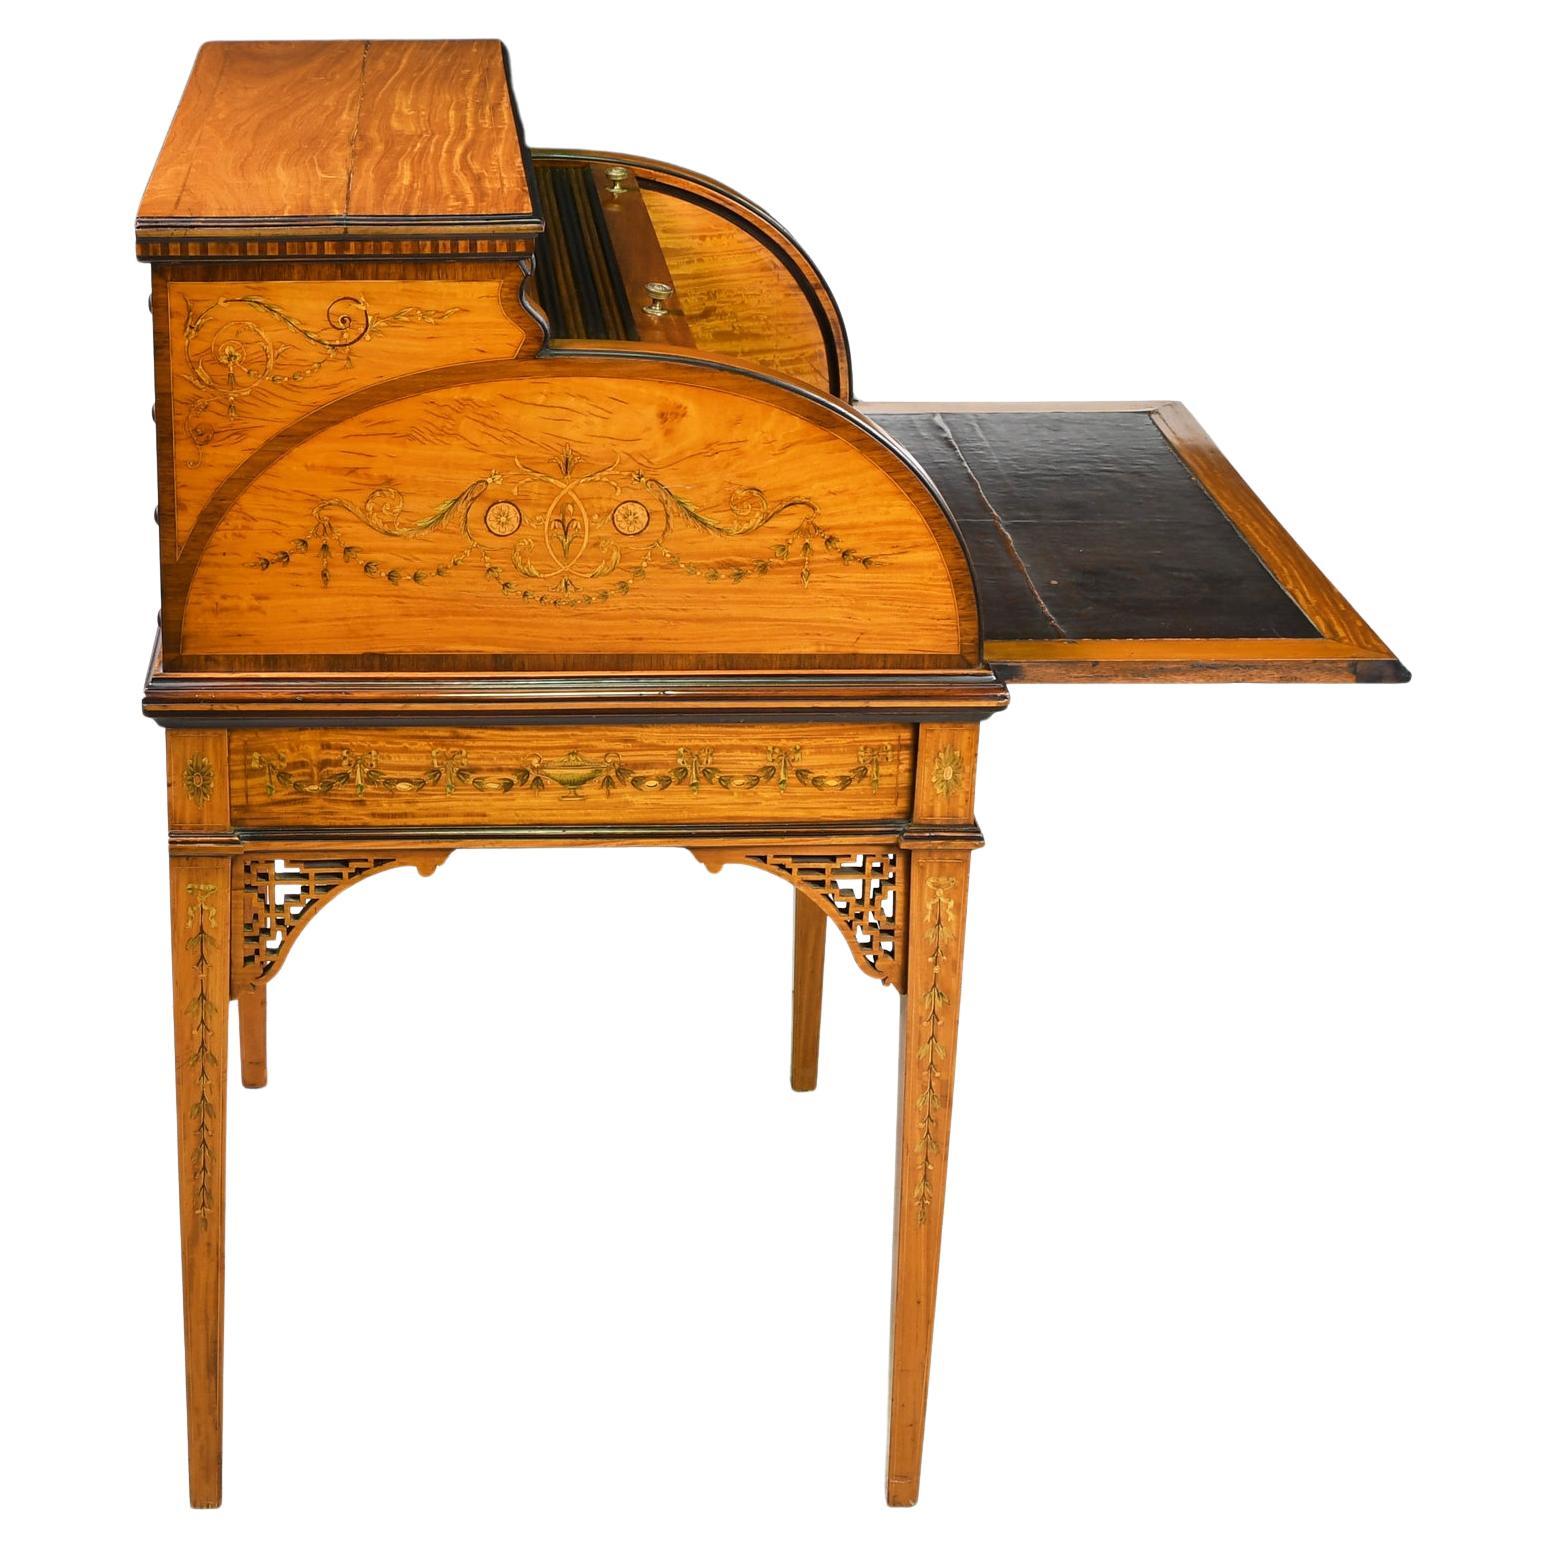 American Gilded Age Hepplewhite-Style Writing Desk in Satinwood w/ Marquetry For Sale 4